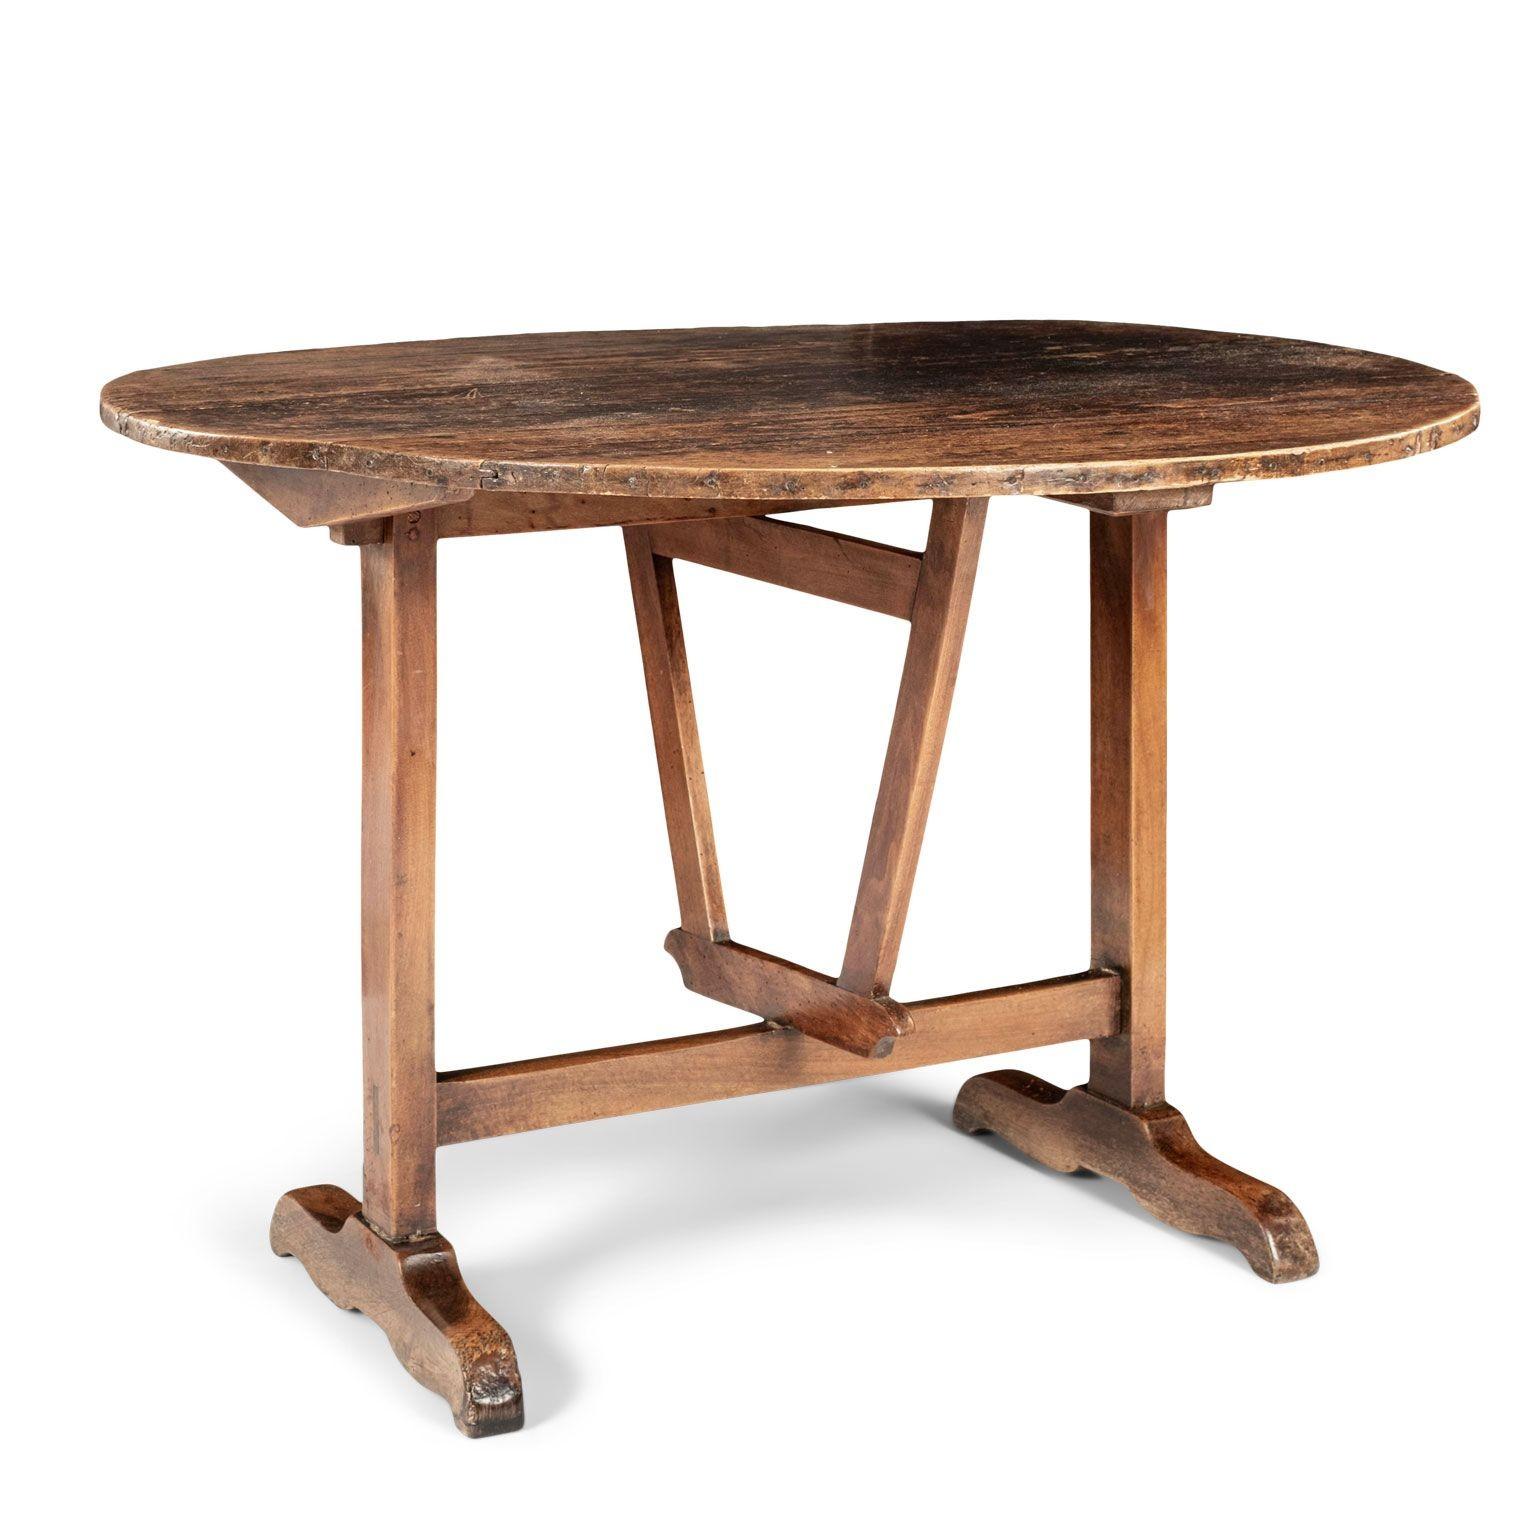 French pine and fruitwood wine tasting table, or vendange table, dating to the late 19th century. Circular pine top upon a hinged fruitwood harp-support. Finish is beautifully irregular dark-to-light brown and partially sun-bleached in places.